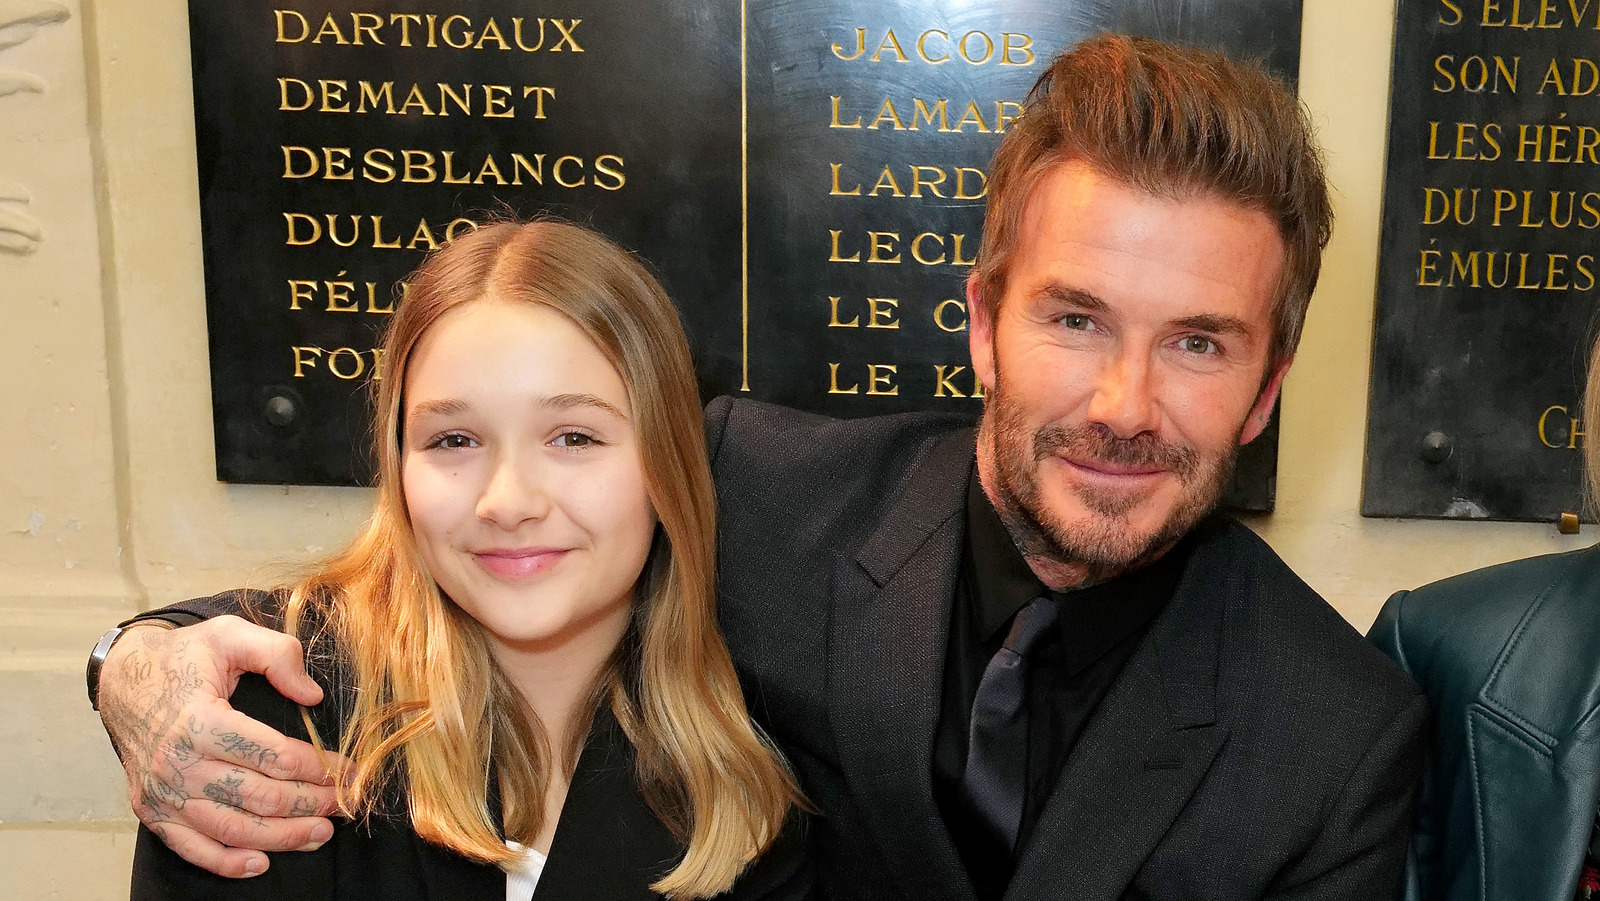 David And Victoria Beckham's Daughter Harper Lives An Extremely Lavish Life